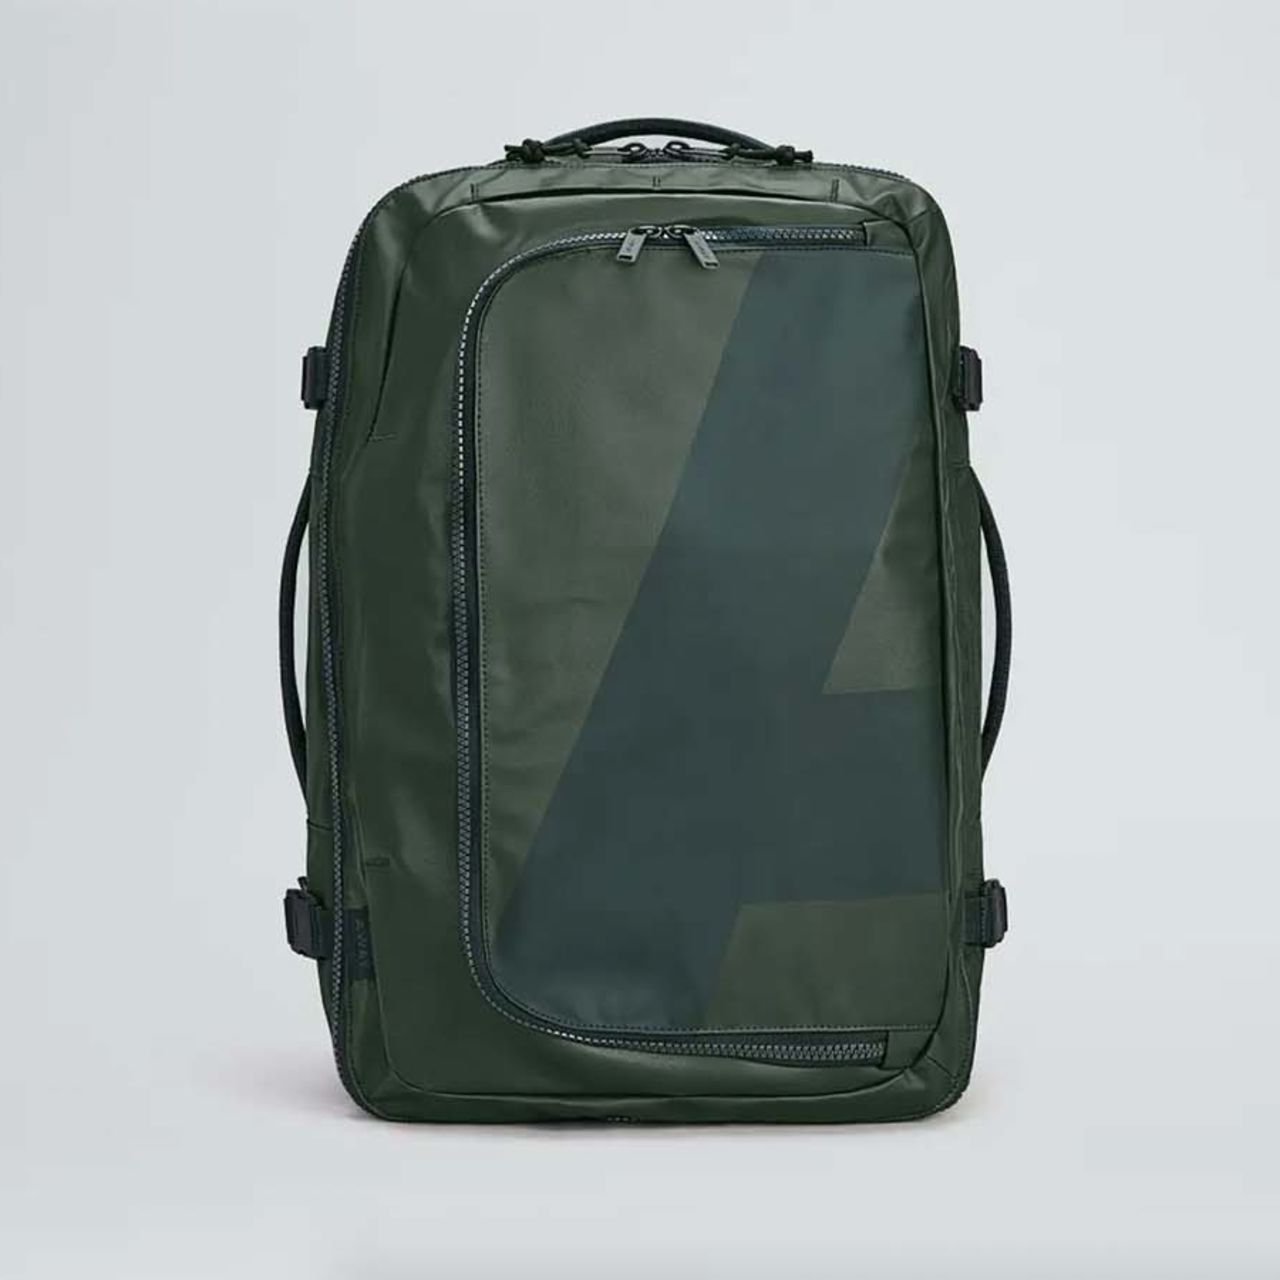 Swiftbags Duffle bags funky styles Duffel With Wheels (Strolley) Airport  green - Price in India